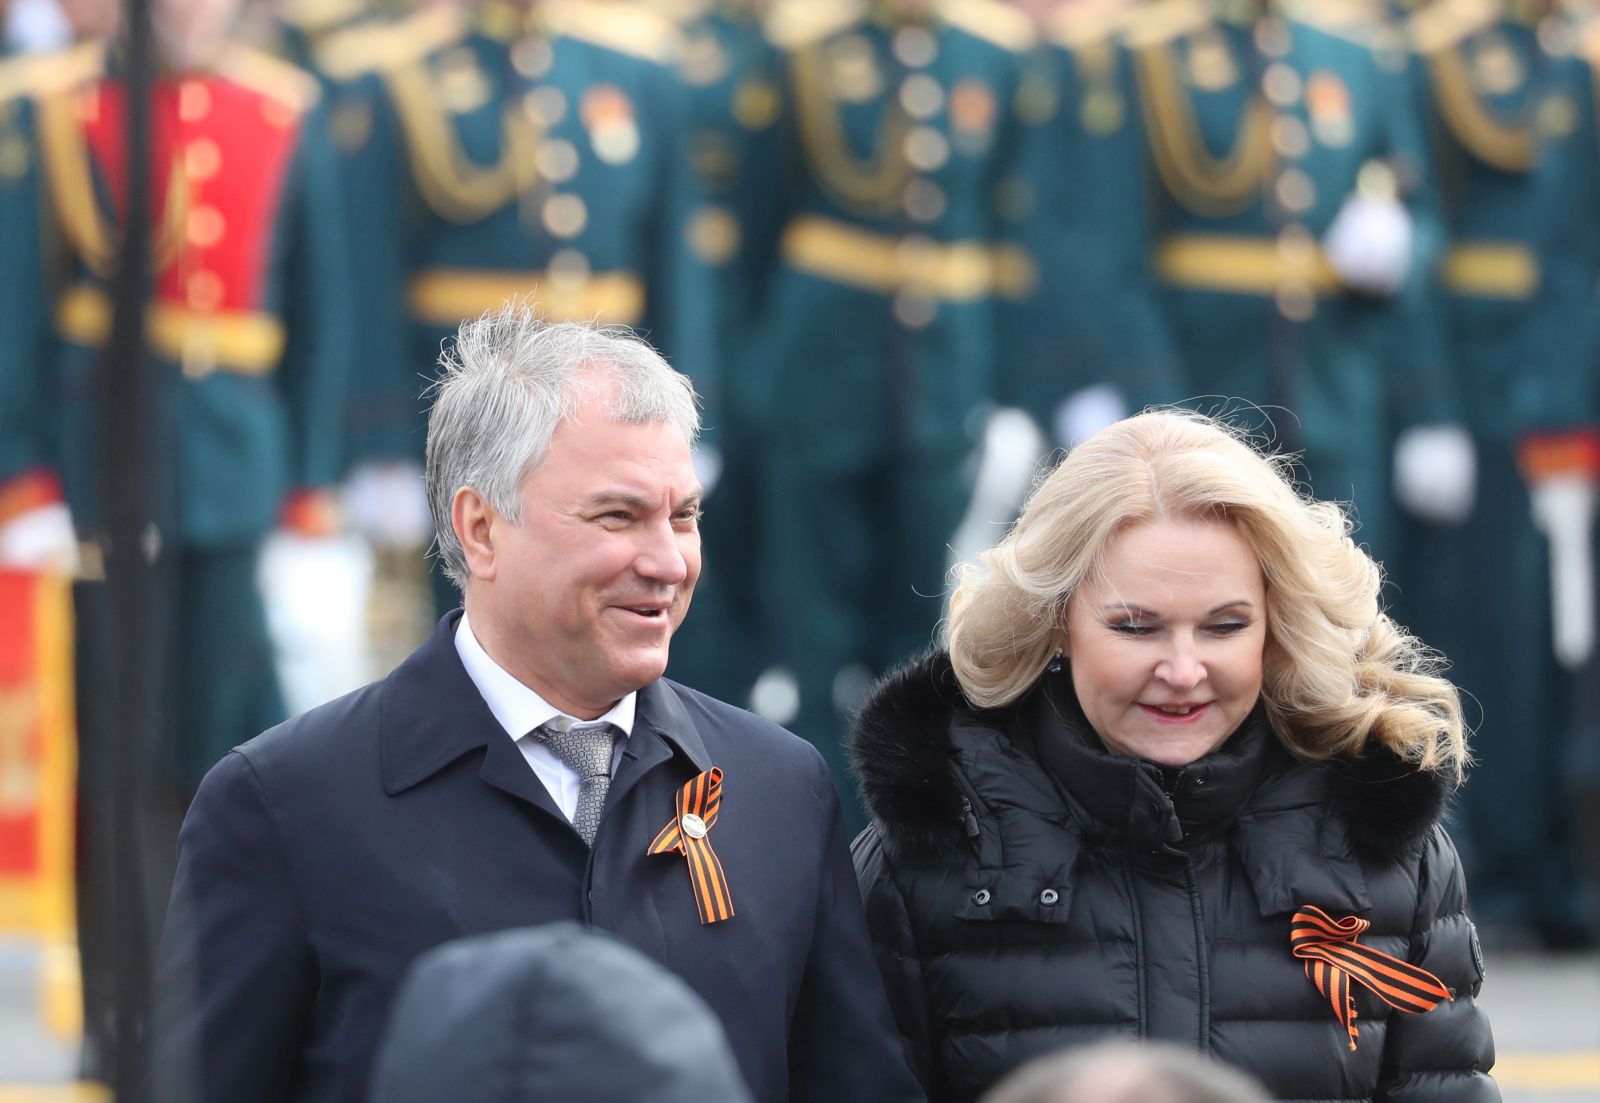 epa09935167 Chairman of the Russian State Duma (lower house of Russia's parliament) Vyacheslav Volodin (L), and Russian Deputy Prime Minister Tatyana Golikova (R), arrive to attend the Victory Day military parade in the Red Square in Moscow, Russia, 09 May 2022. The Victory Day military parade takes place annualy to mark the victory of the Soviet Union over Nazi Germany in World War II.  EPA/MAXIM SHIPENKOV